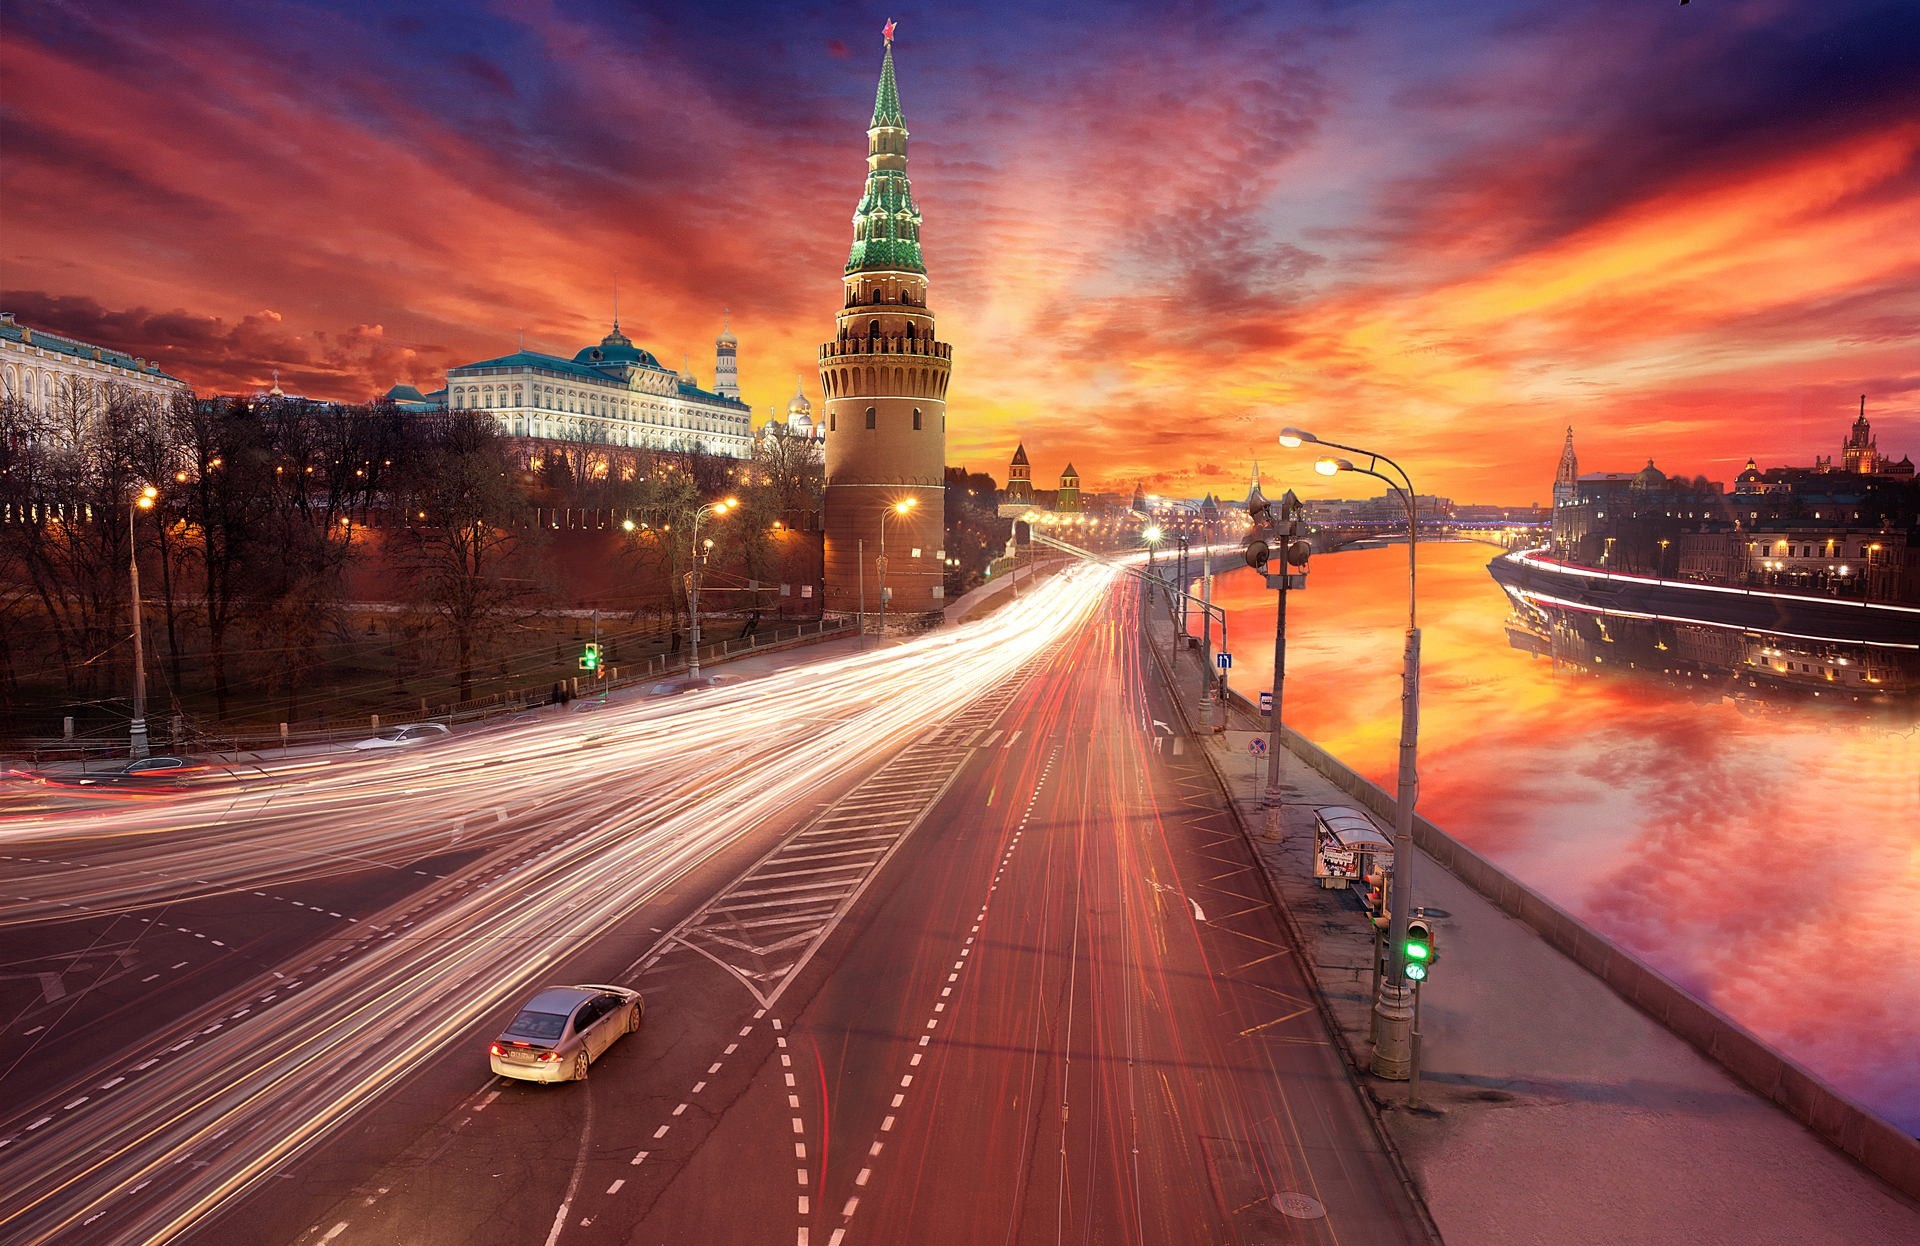 russia, man made, moscow, sunset, cities